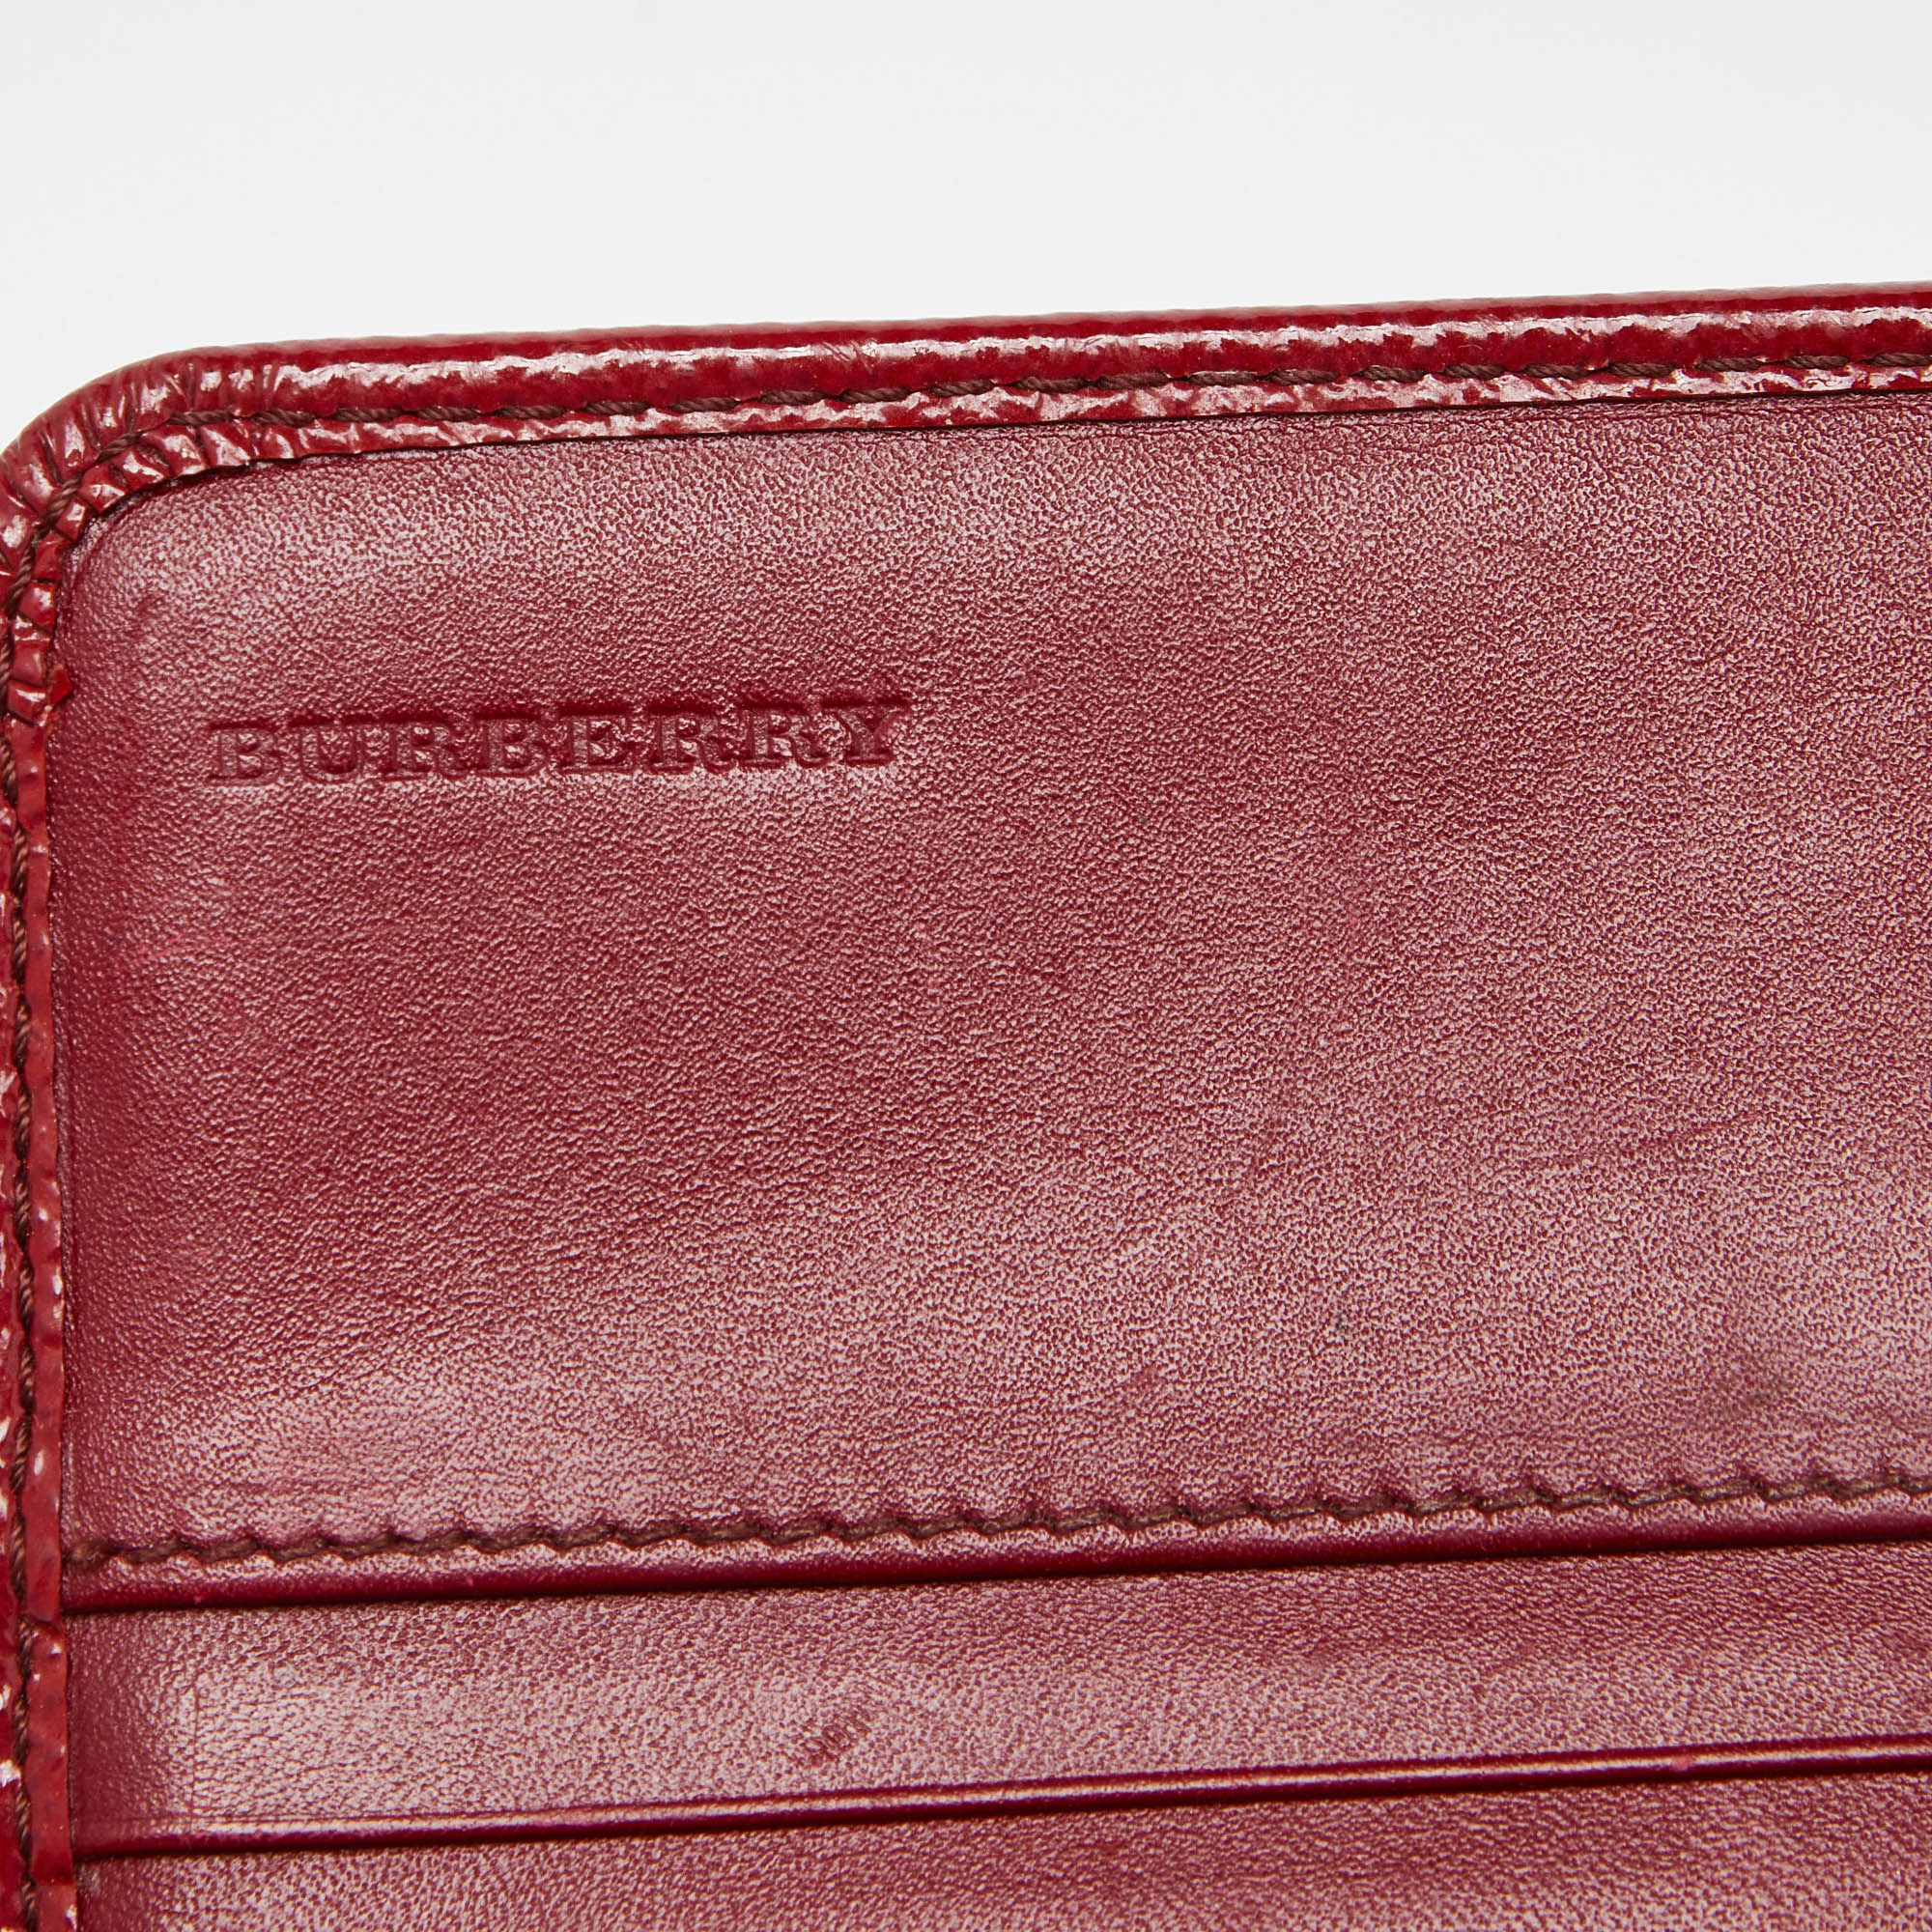 Burberry Red Patent Leather Flap Continental Wallet